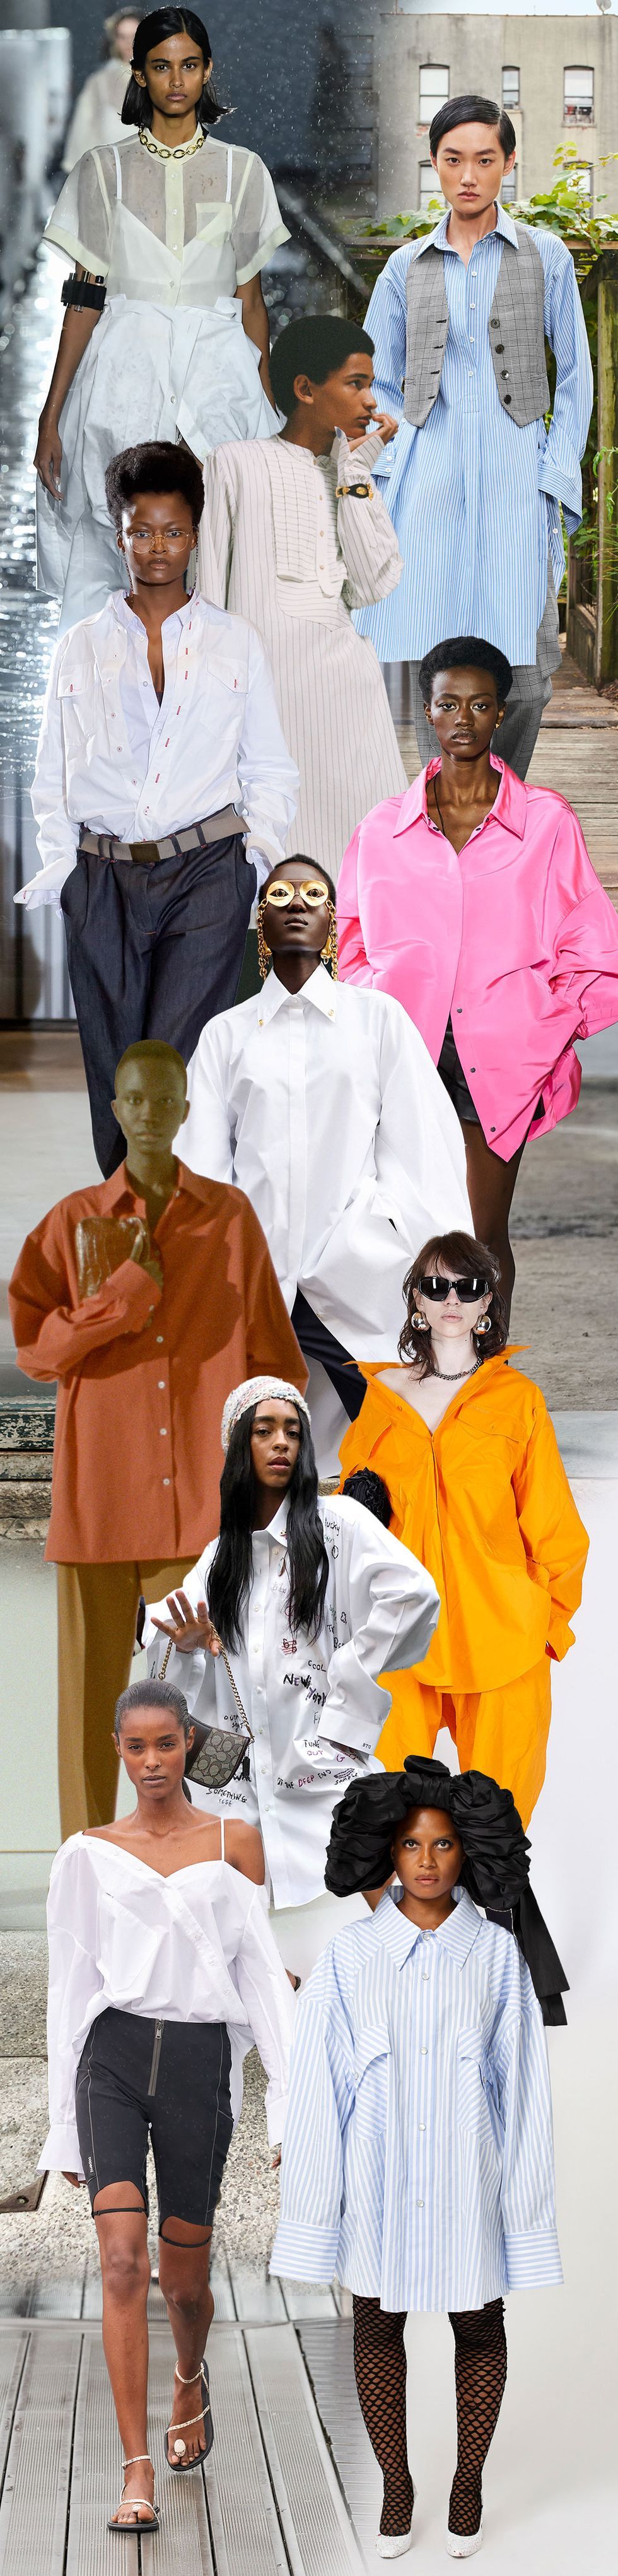 A Spring 2021 Fashion Trend to Watch Out for: Barely There